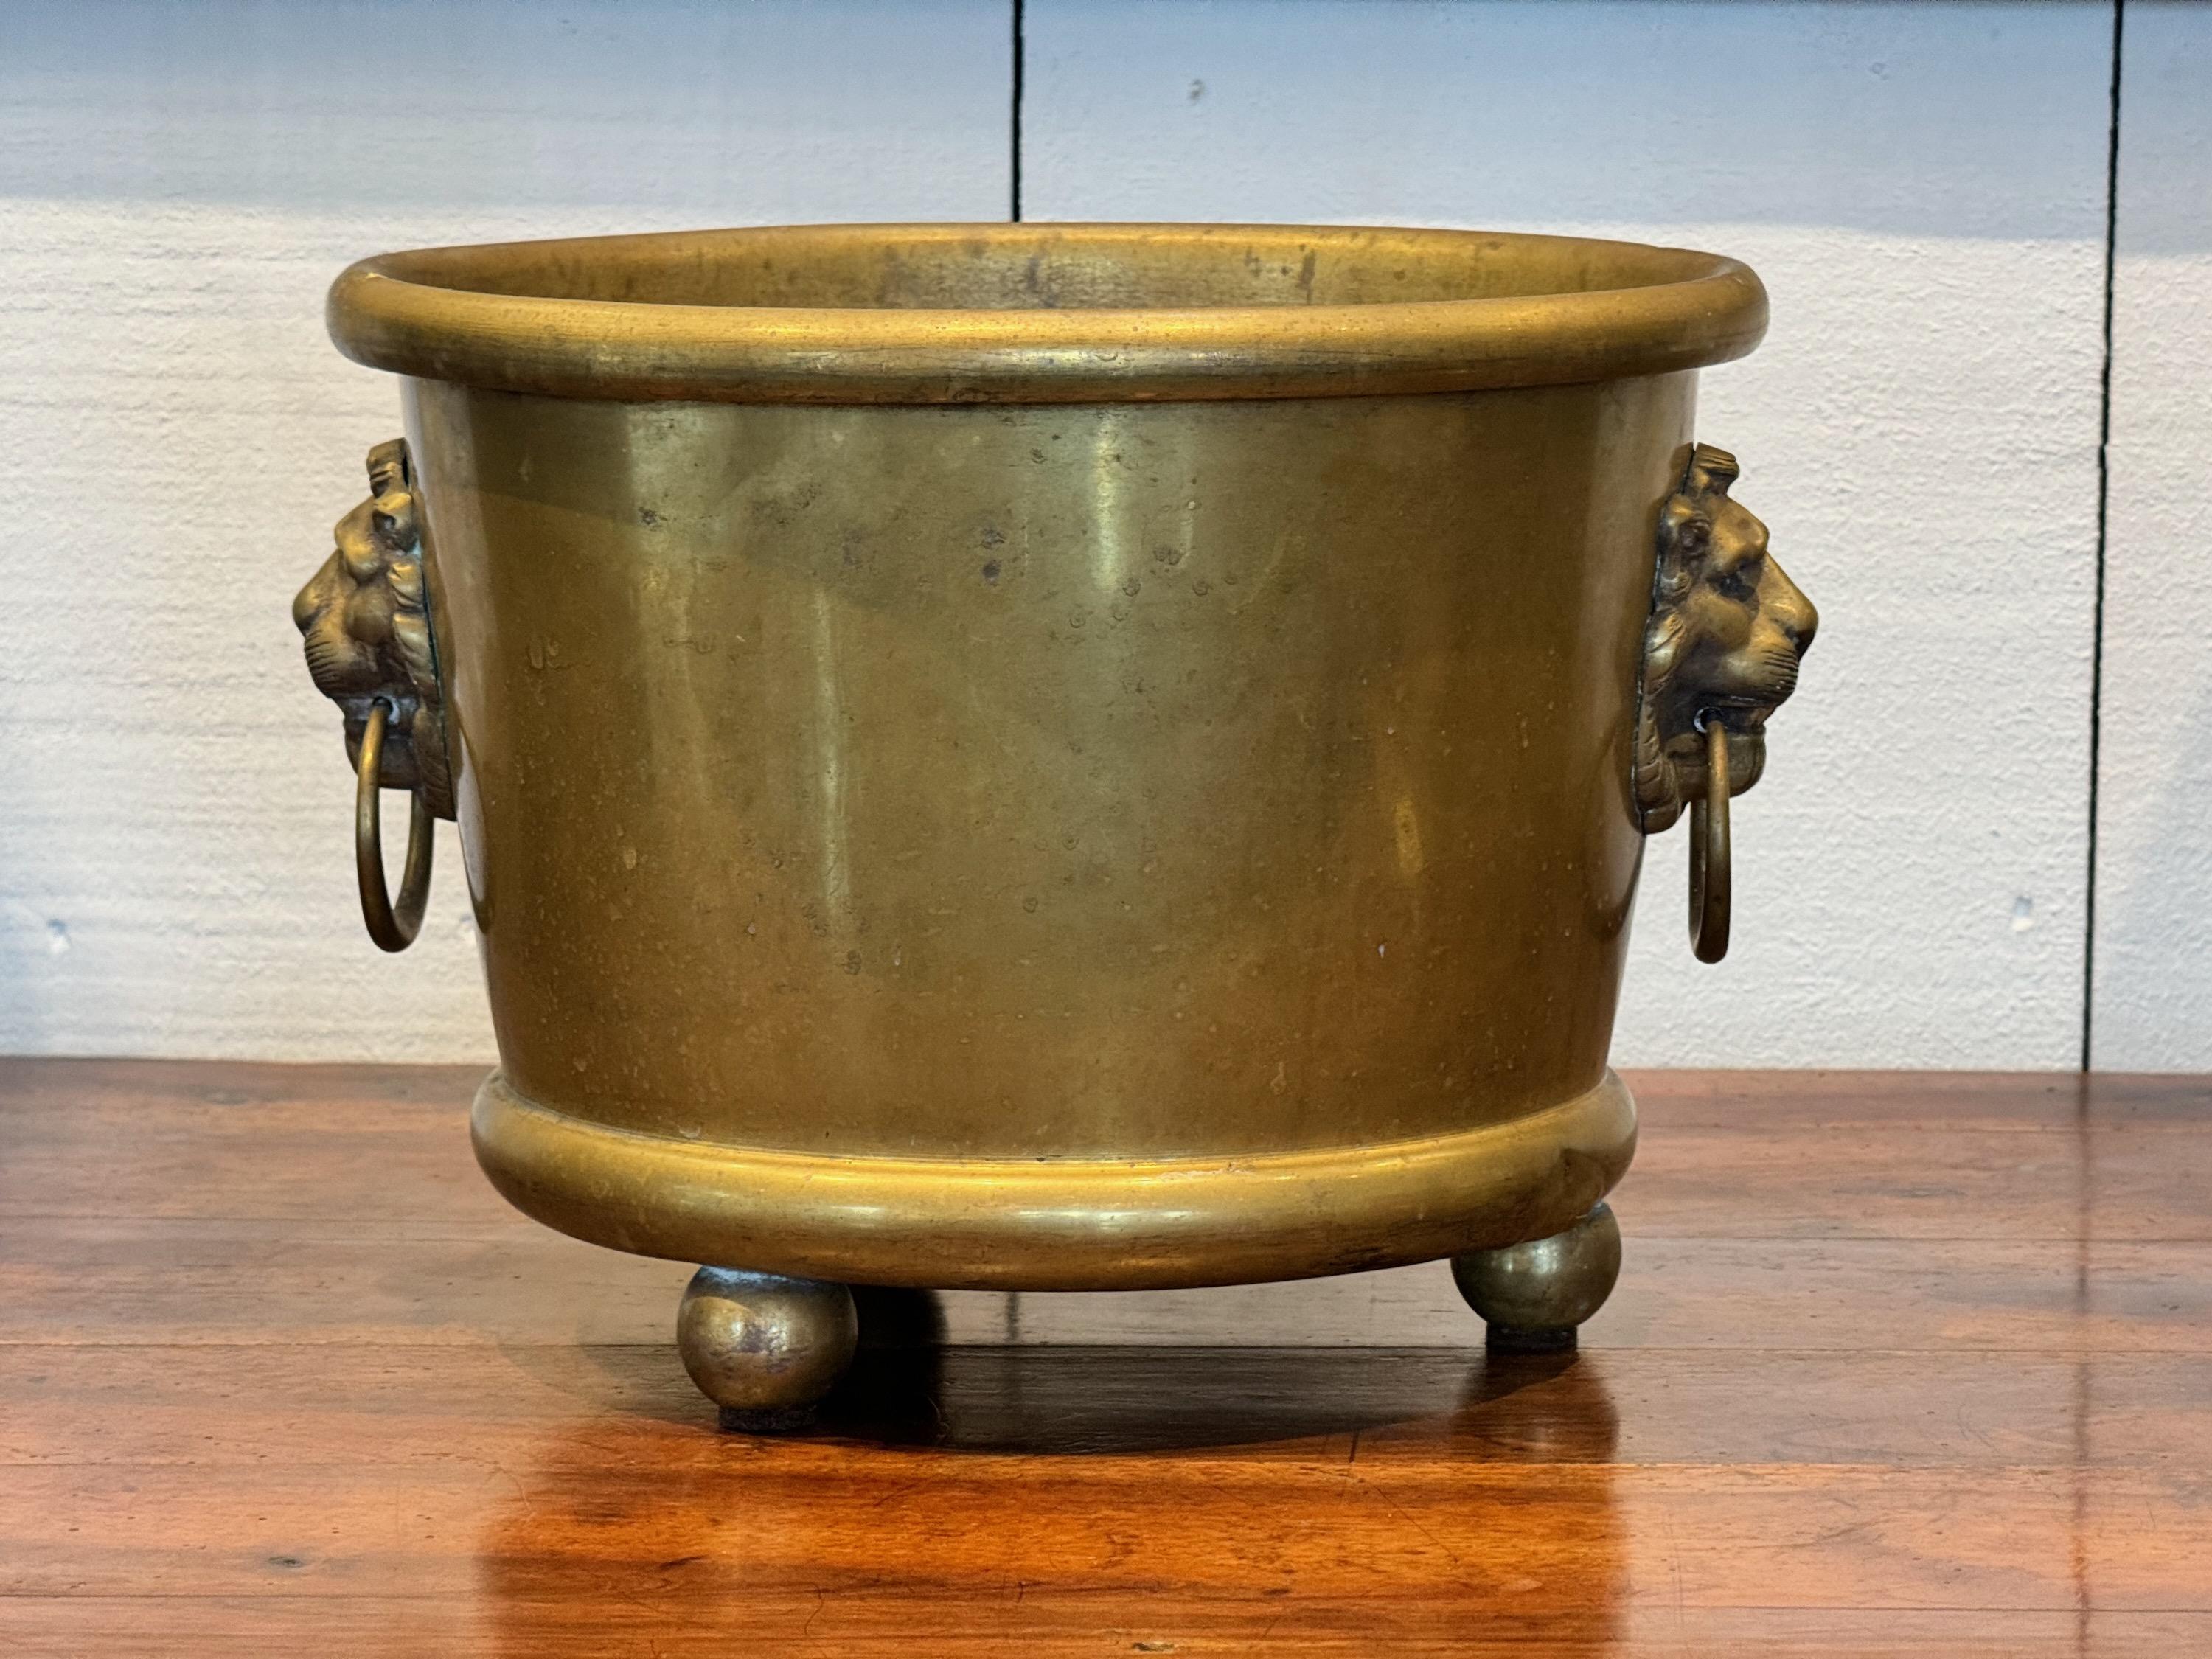 A handsome brass pot with lions head handles. Beautiful with flowers.